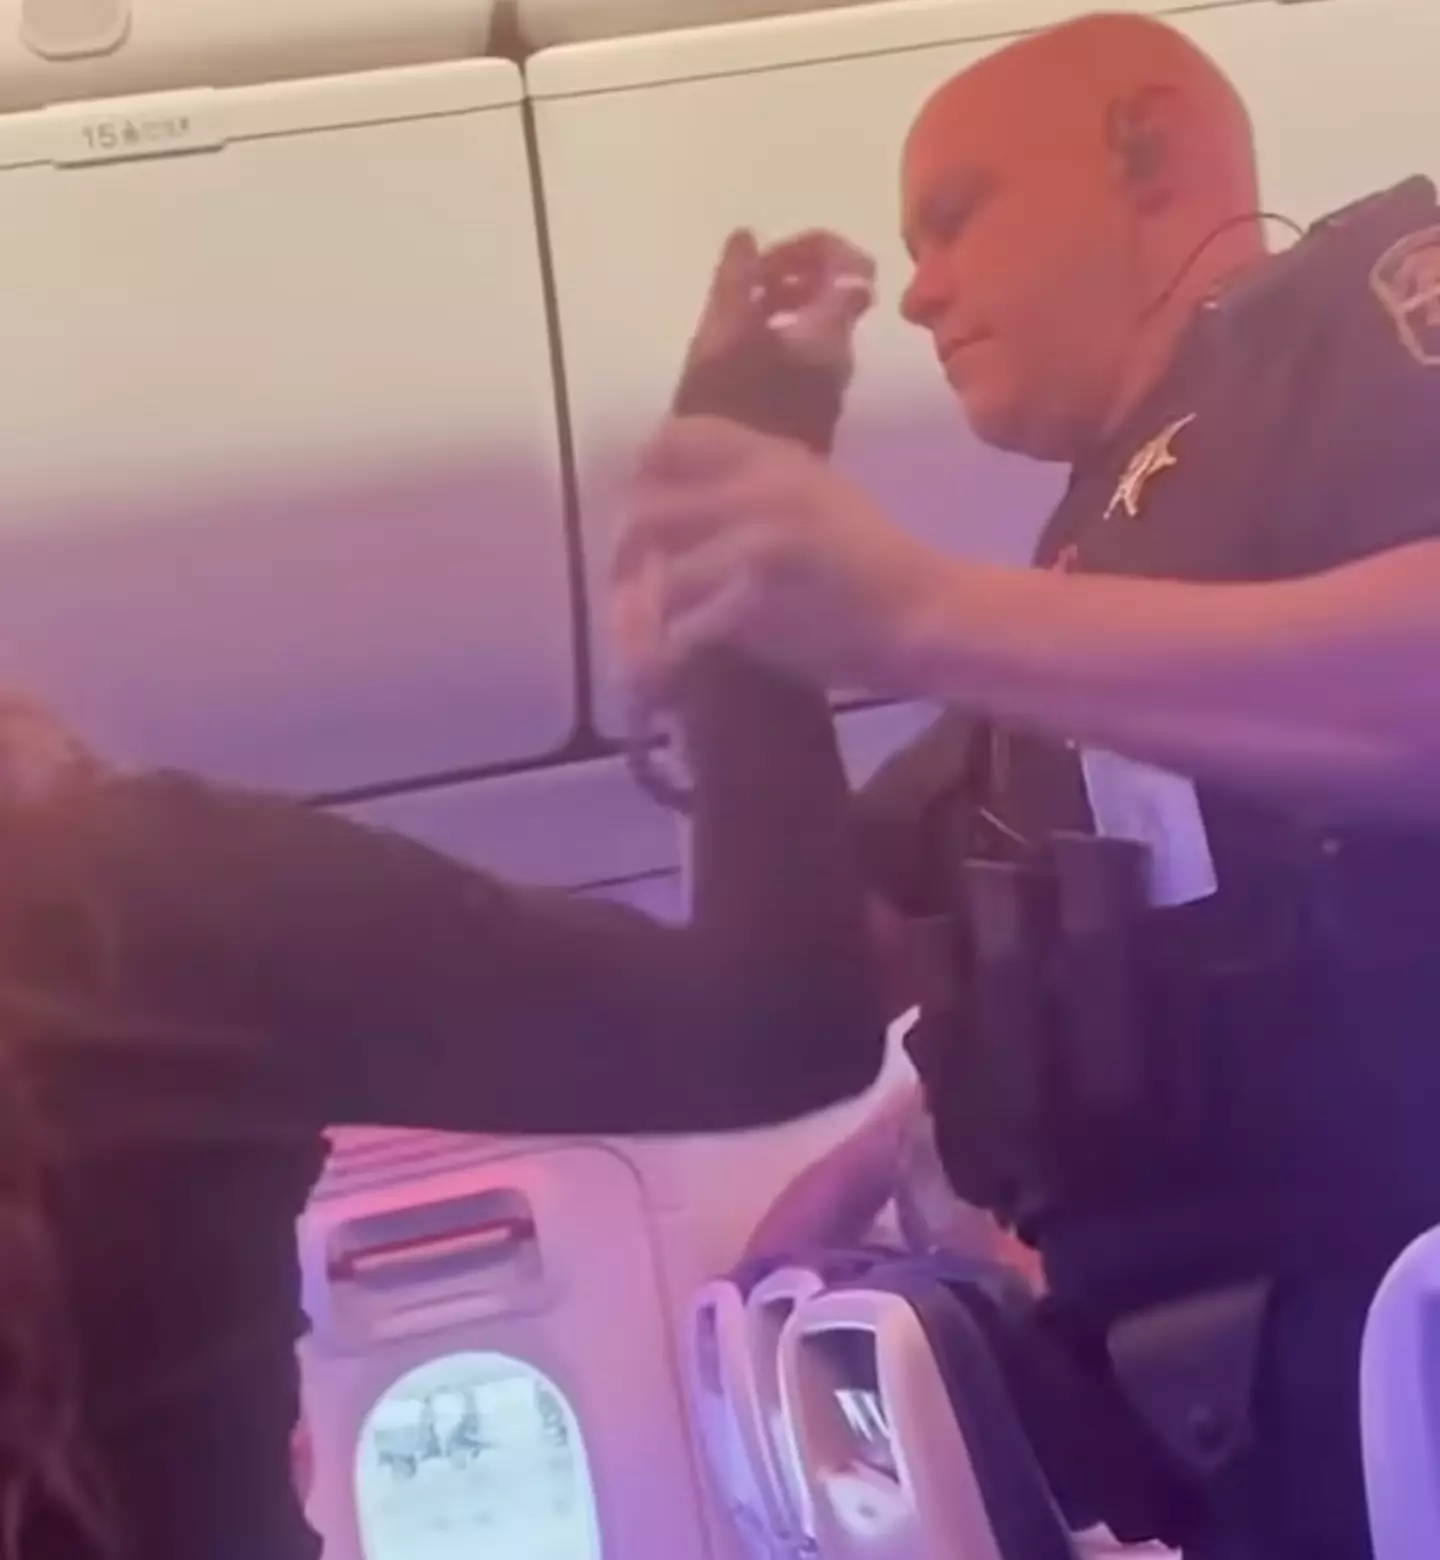 The woman was removed from the plane by law enforcement officers.